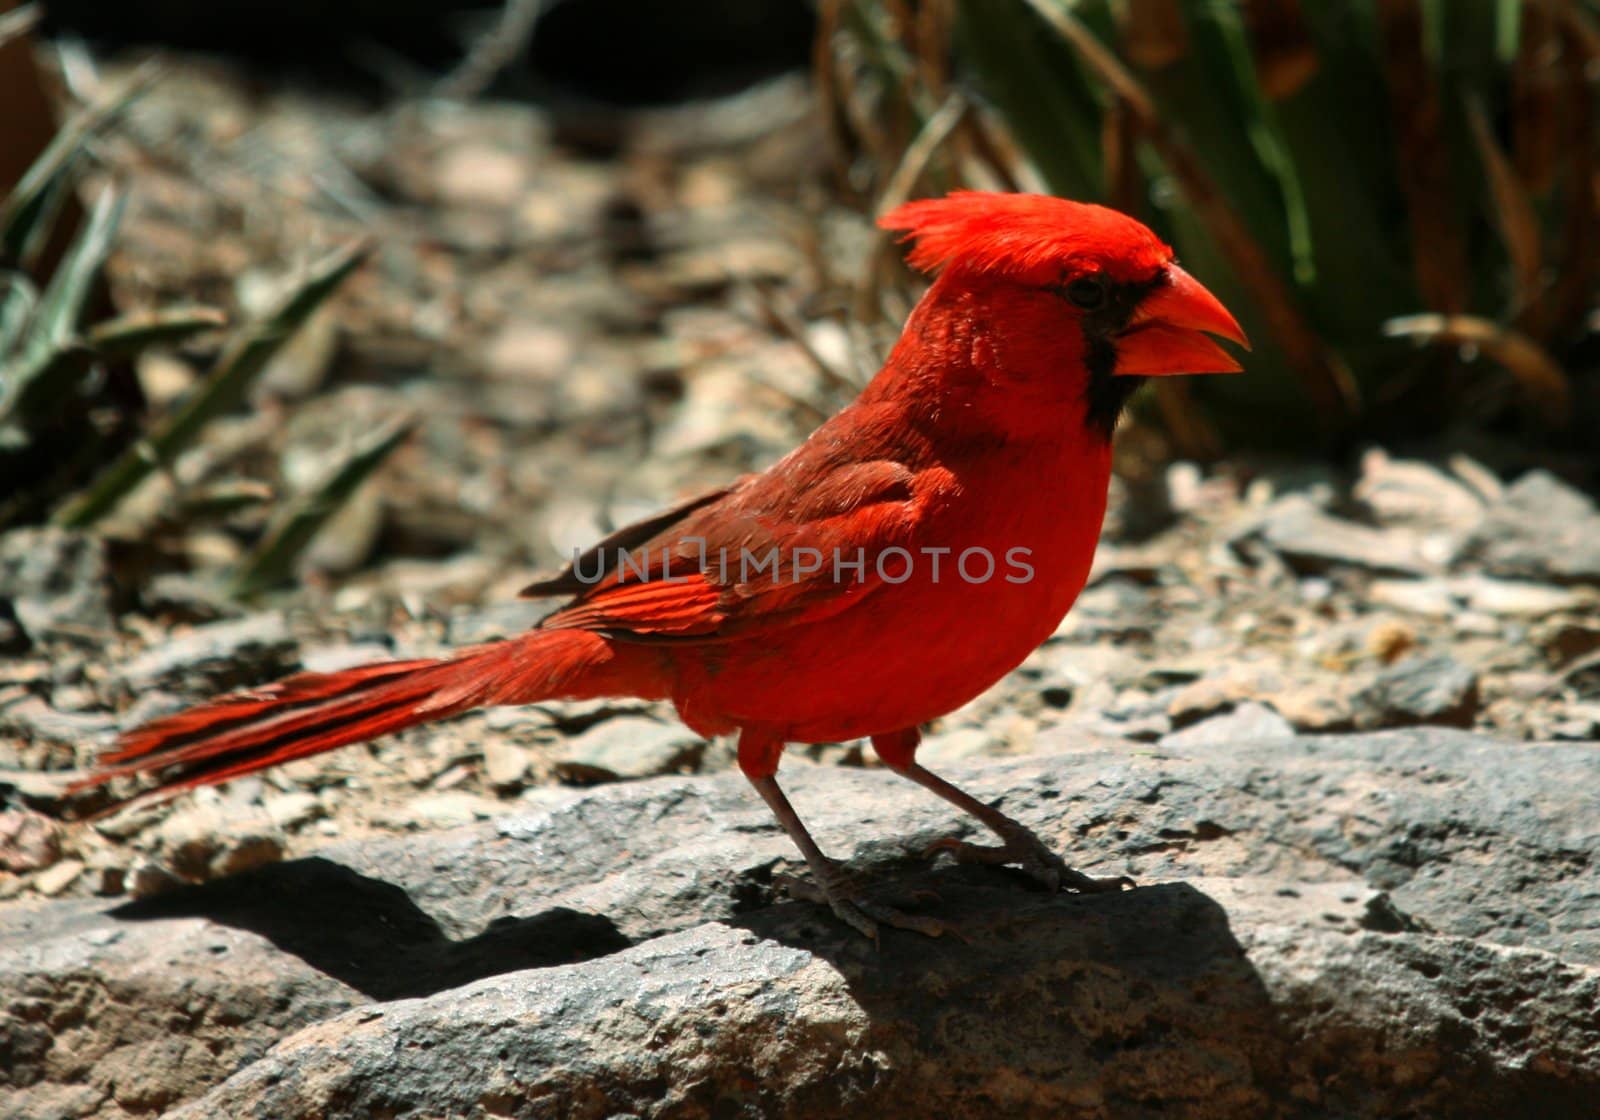 Bright red Northern Cardinal (Cardinalis cardinalis) is native to Arizona as well as many eastern and midwestern states.